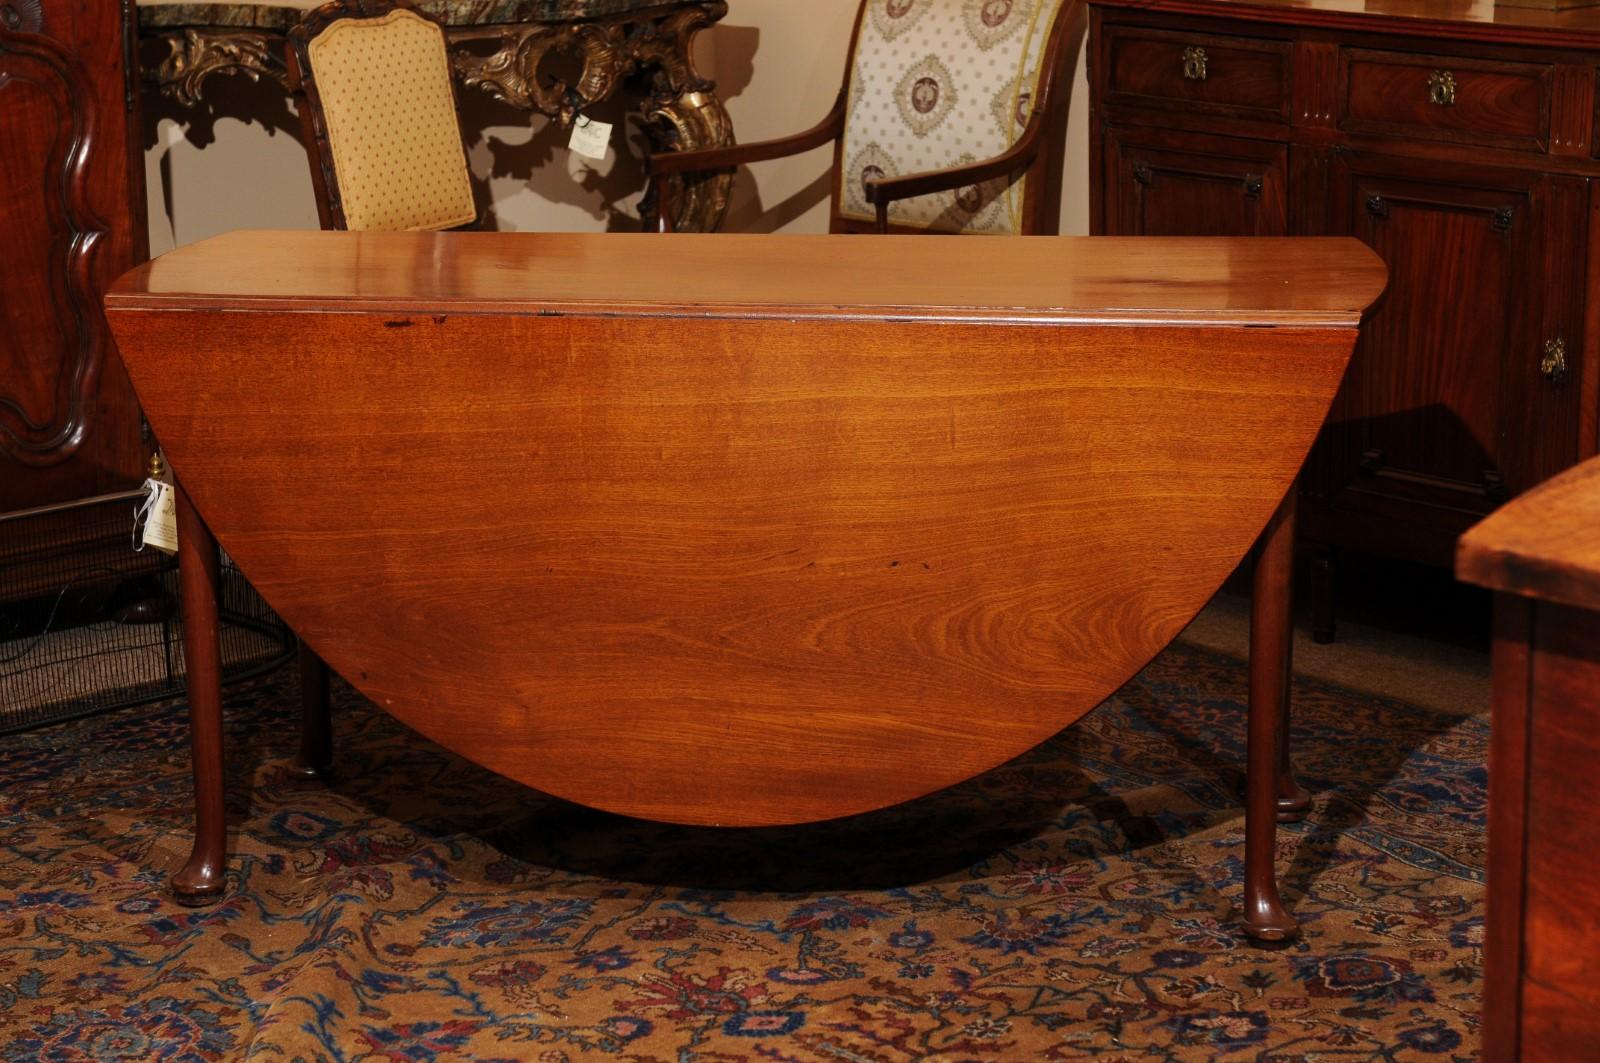  Mid-18th C English George II Mahogany Drop Leaf Oval Dining Table with Pad Feet (Table de salle à manger ovale à feuilles tombantes et pieds pad) en vente 6